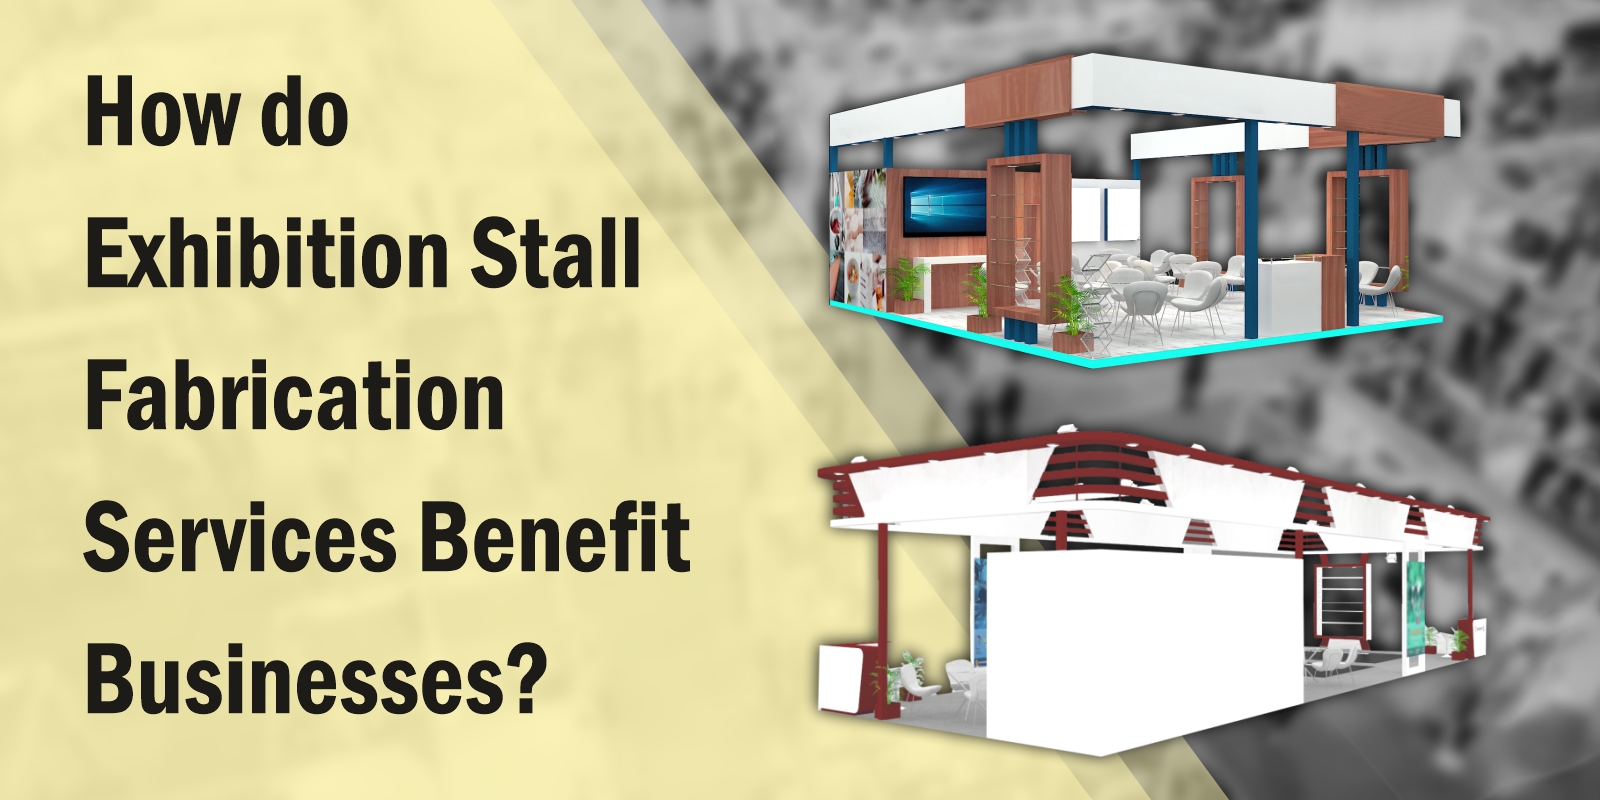 How do Exhibition Stall Fabrication Services Benefit Businesses?